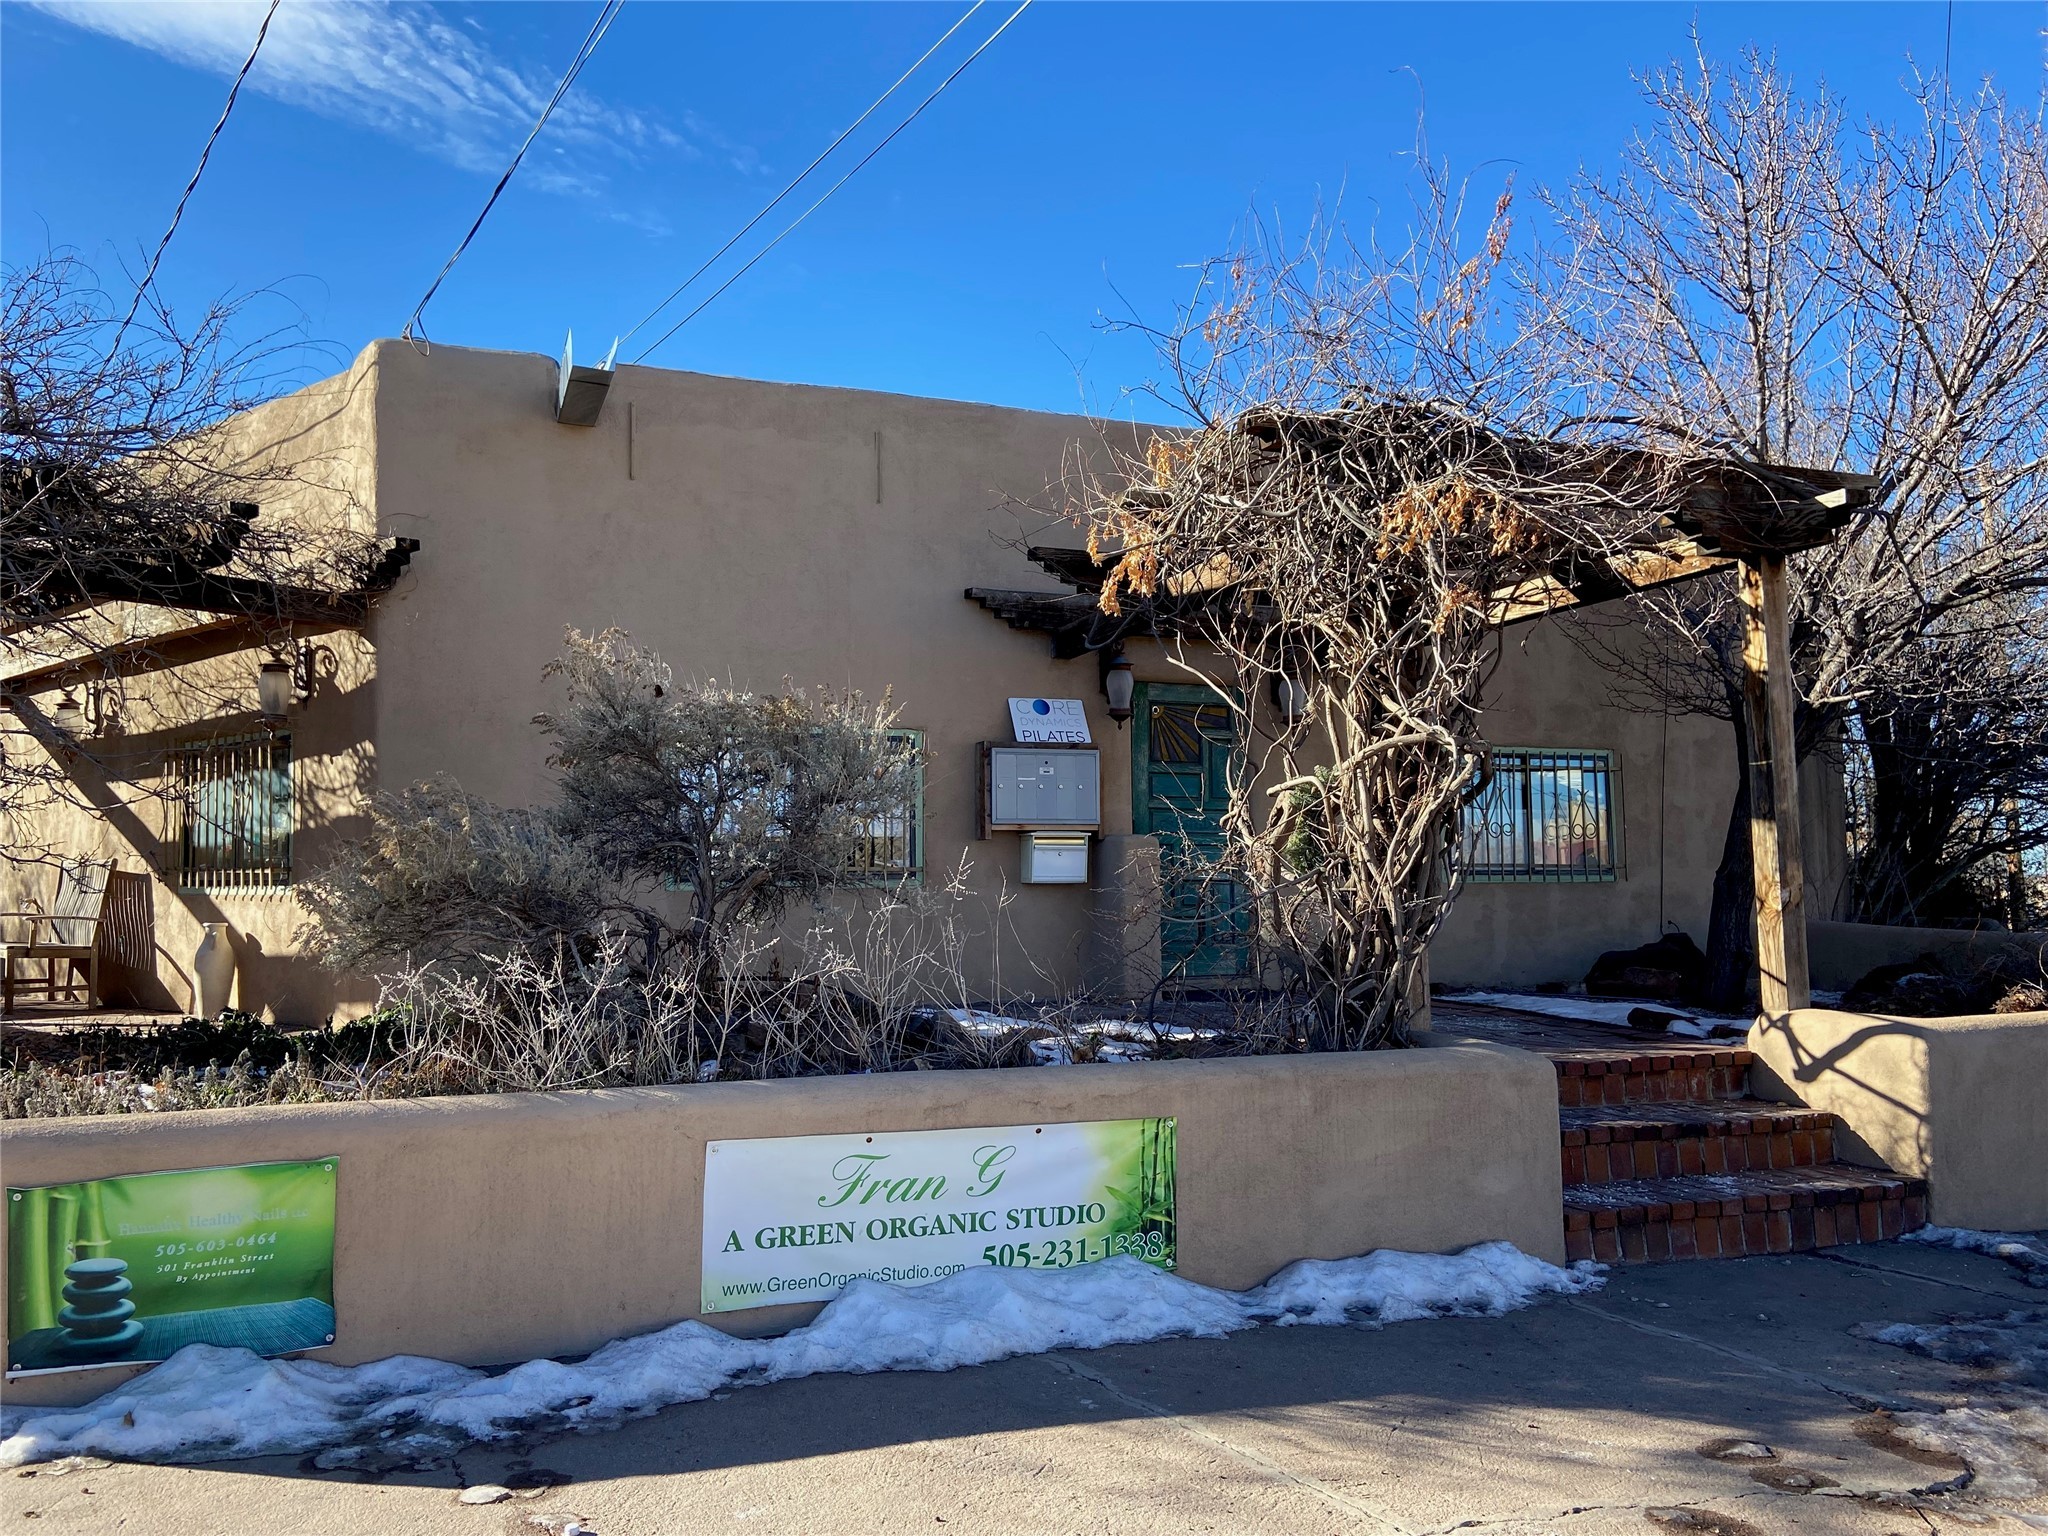 501 Franklin 13, Santa Fe, New Mexico 87501, ,Commercial Lease,For Rent,501 Franklin 13,202338699